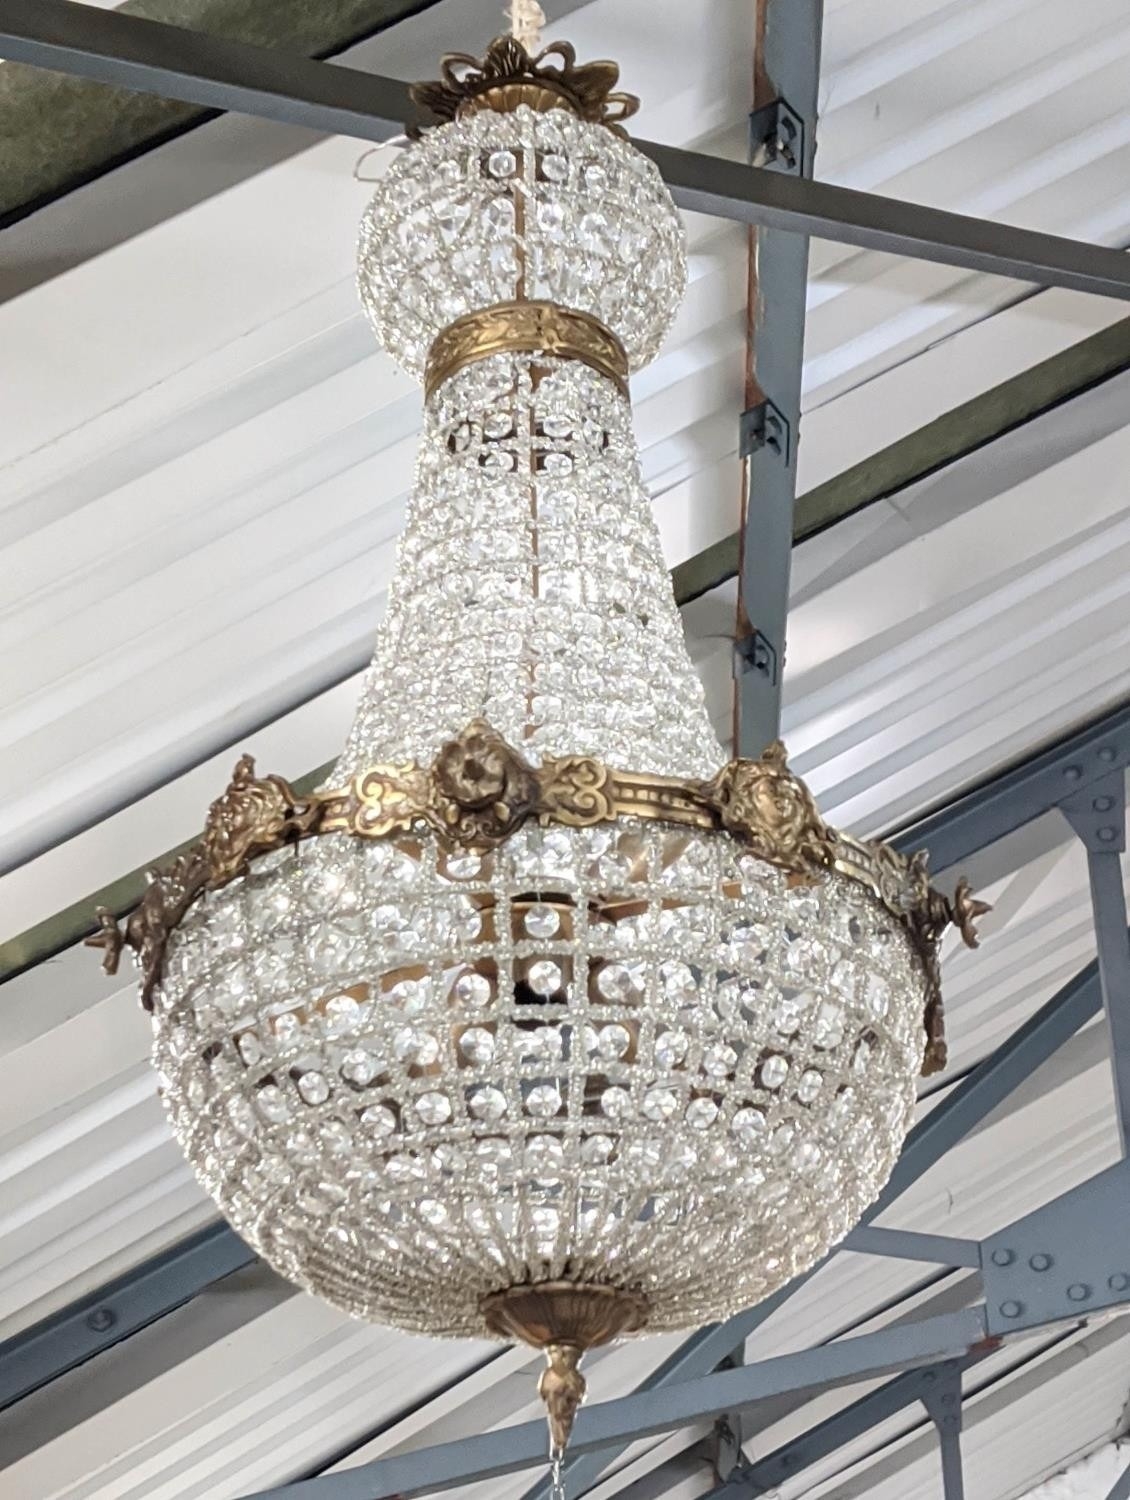 BAG CHANDELIERS, a pair, Empire style glass and gilt metal, 62cm H. (2) - Image 2 of 4